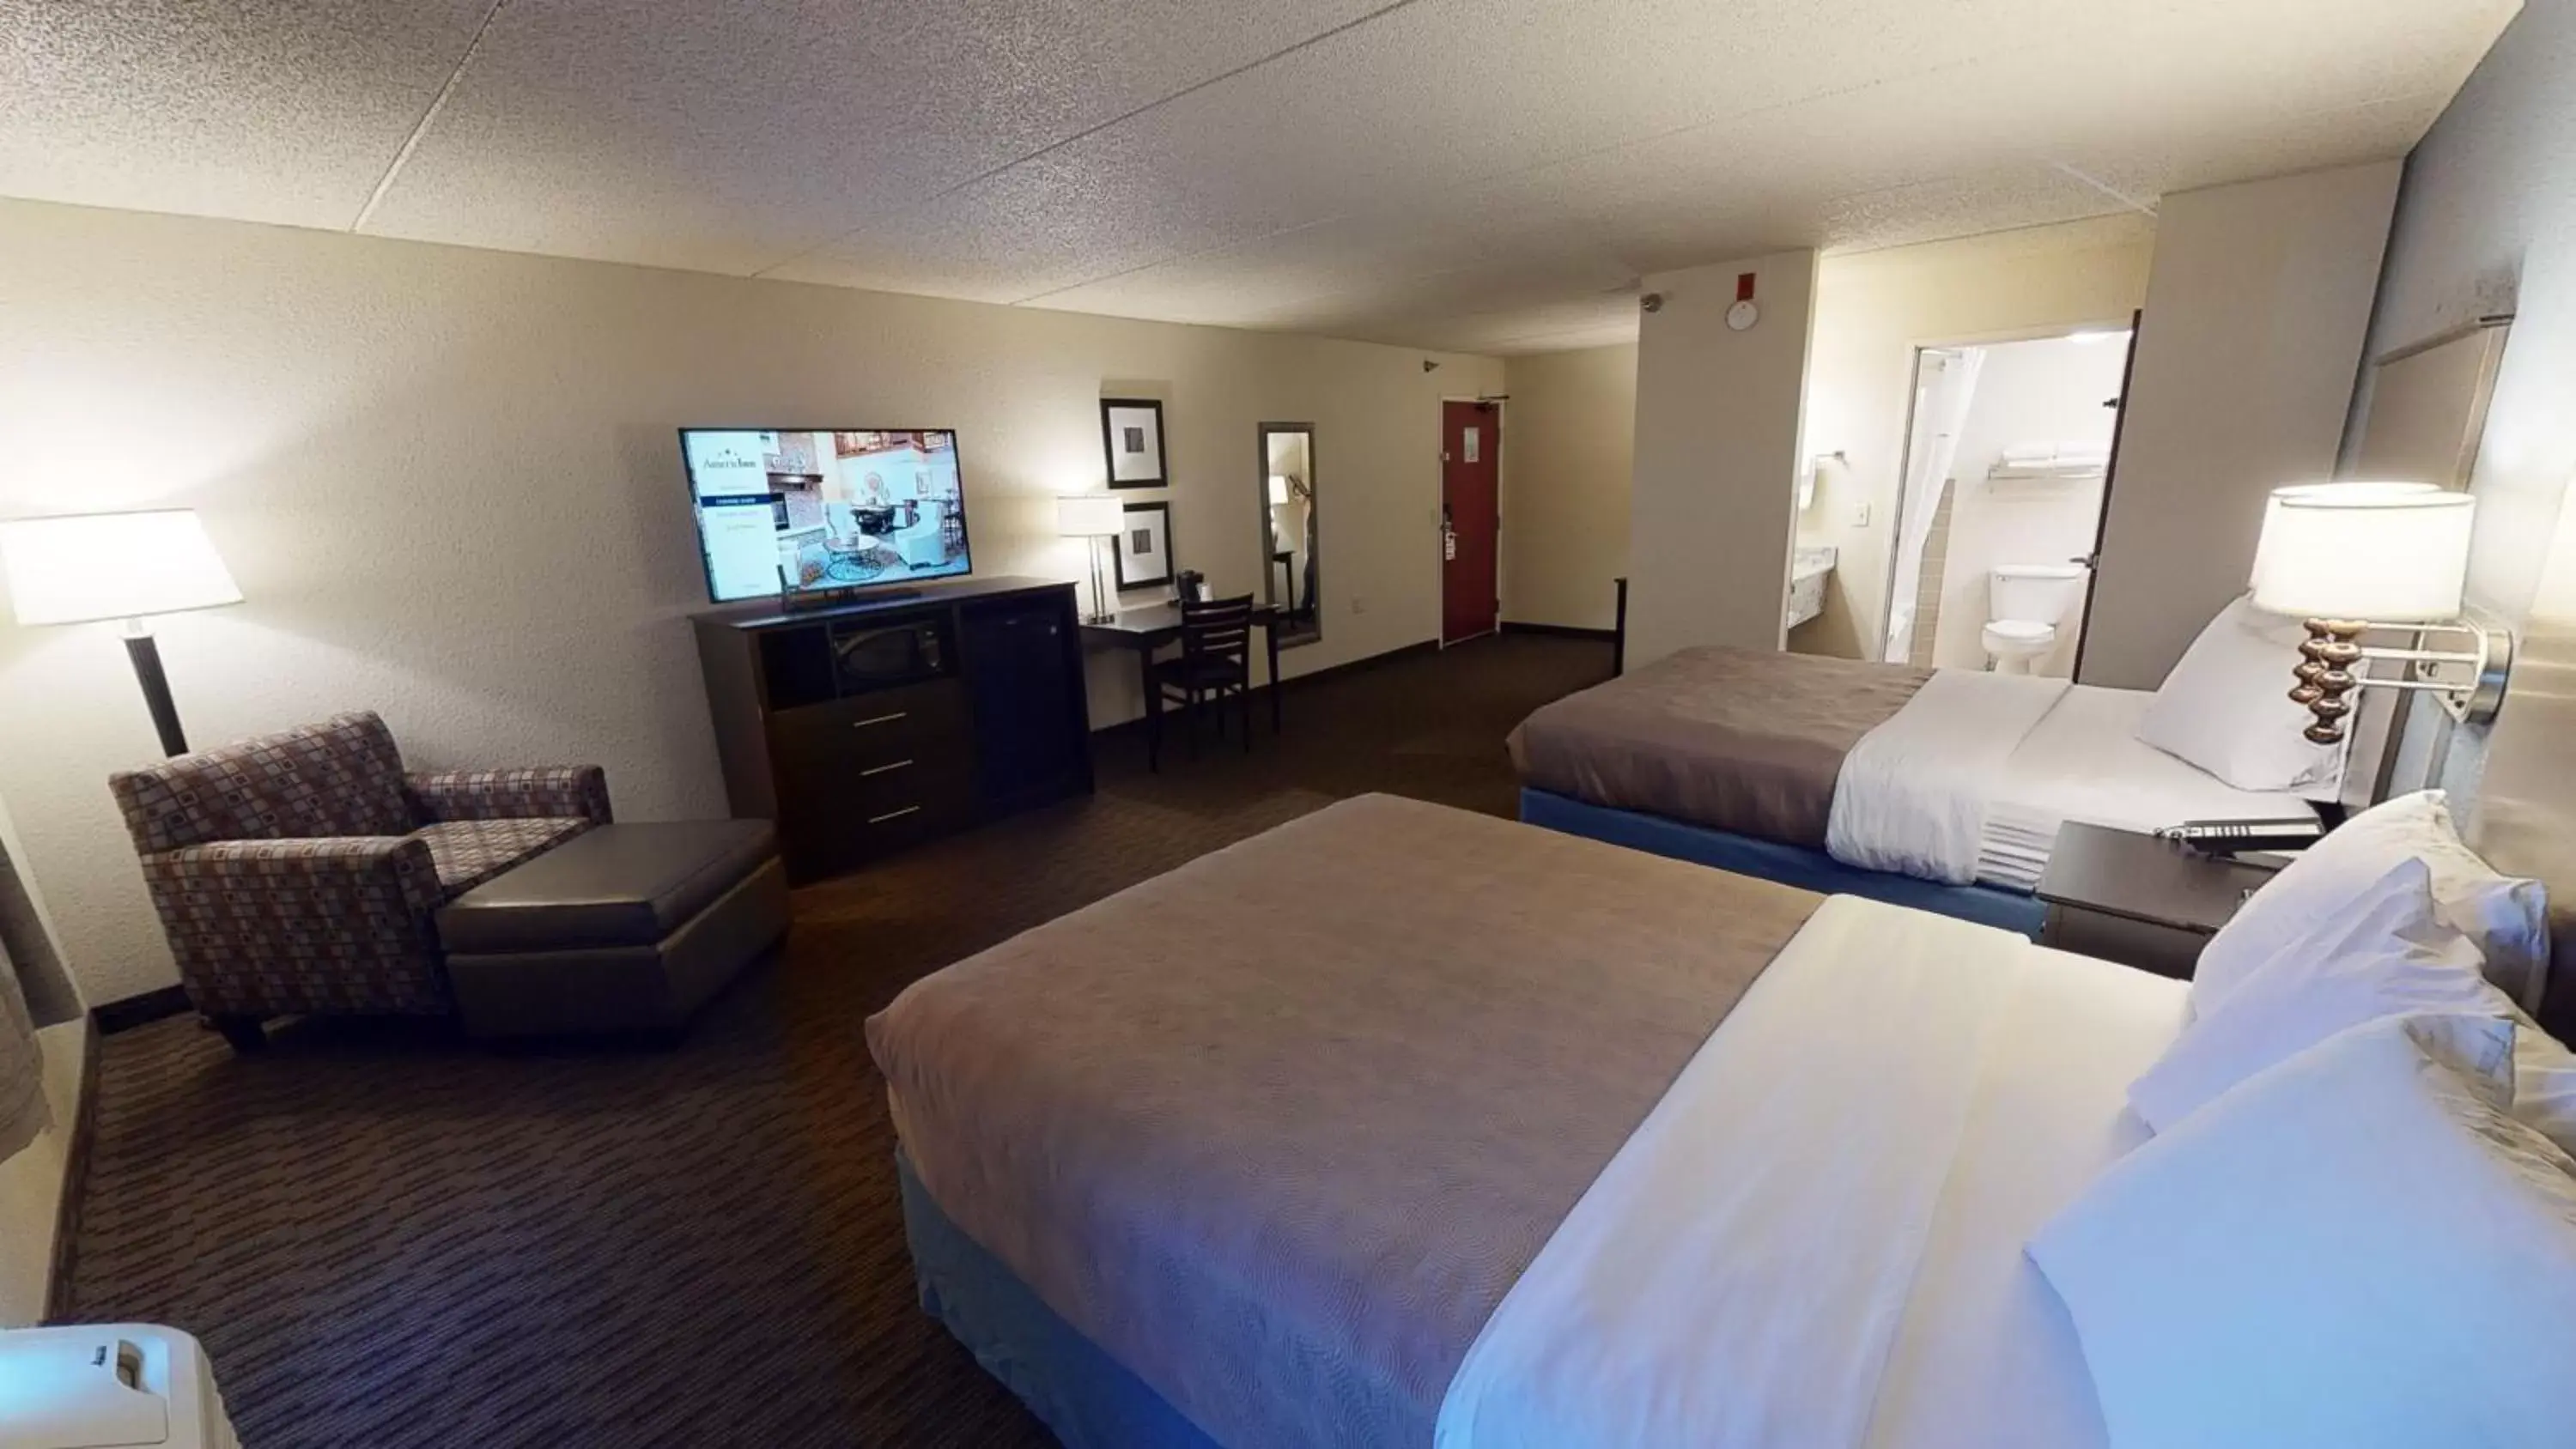 Breakfast, TV/Entertainment Center in AmericInn by Wyndham Mounds View Minneapolis